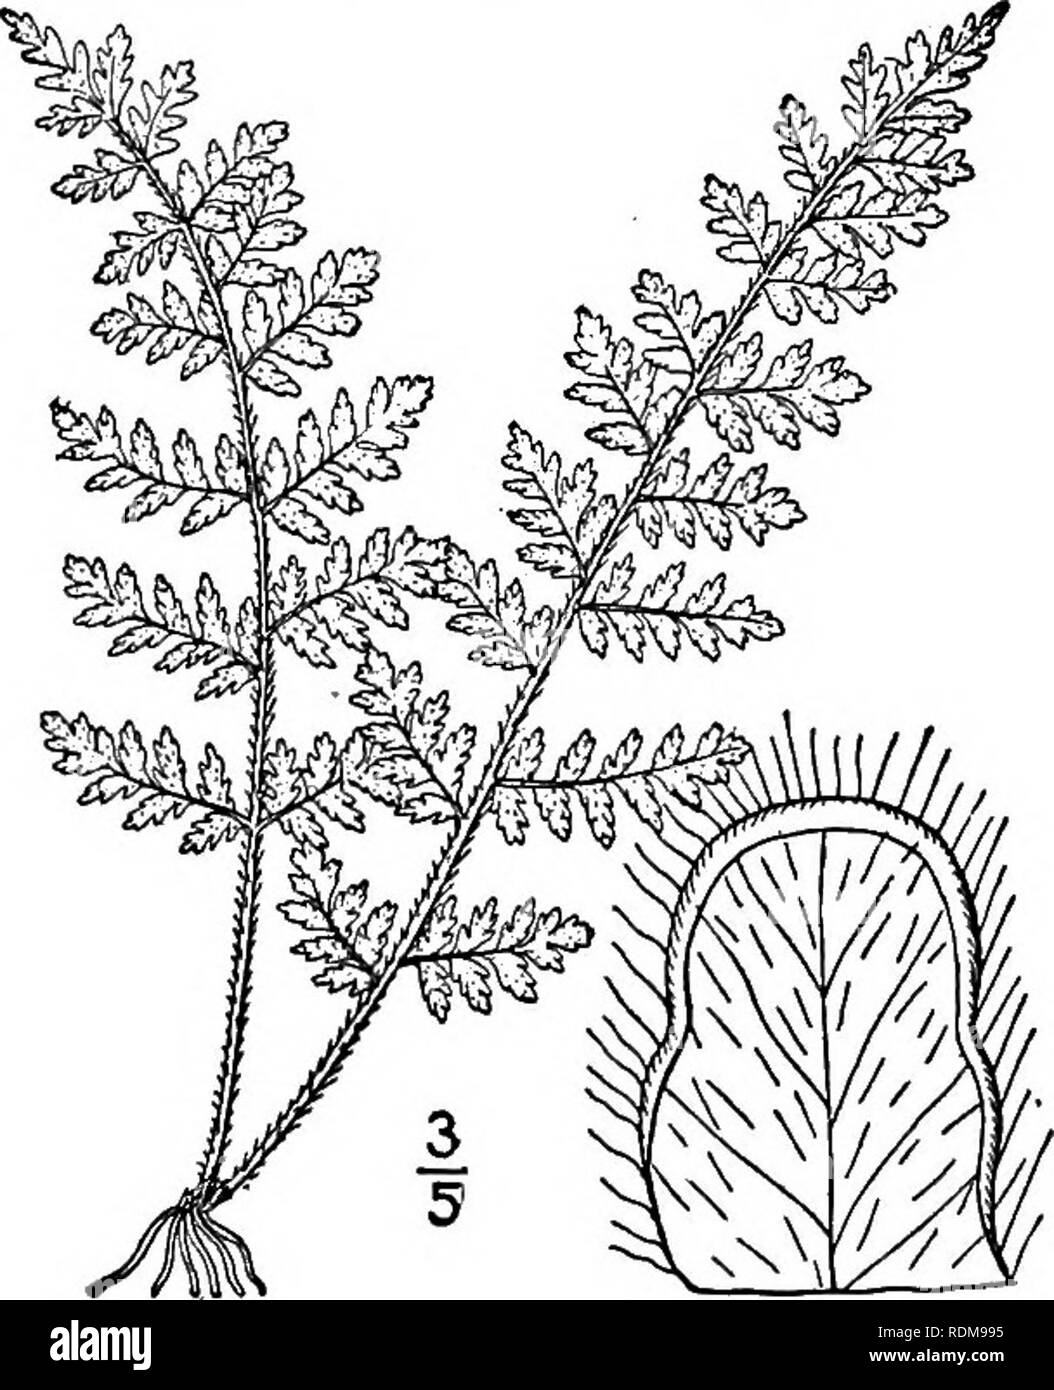 . An illustrated flora of the northern United States, Canada and the British possessions, from Newfoundland to the parallel of the southern boundary of Virginia, and from the Atlantic Ocean westward to the 102d meridian. Botany; Botany. i. Cheilanthes alabamensis (Buck!.) Kunze. Alabama Lip-fern. Fig. 78. Pteris alabamensis Buckl. Amer. Journ. Sci. 45: 177. 1843- C. alabamensis Kunze, Linnaea 20: 4. 1847. Rootstock creeping, rather stout and short, clothed with very slender hair-like dark fer- ruginous scales. Stipes black, 3'-7' long, slender, wiry, villous at least towards the base with rust Stock Photo